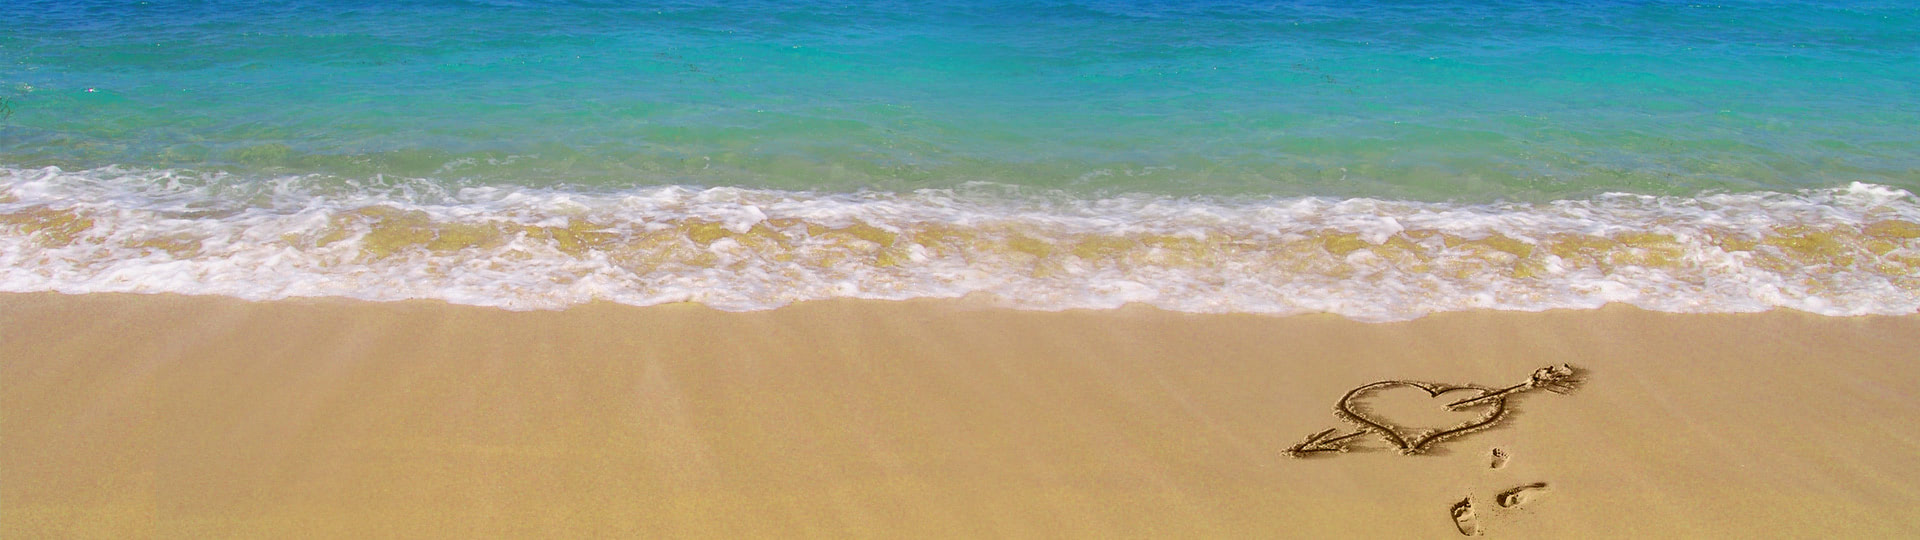 heart in sand facebook cover